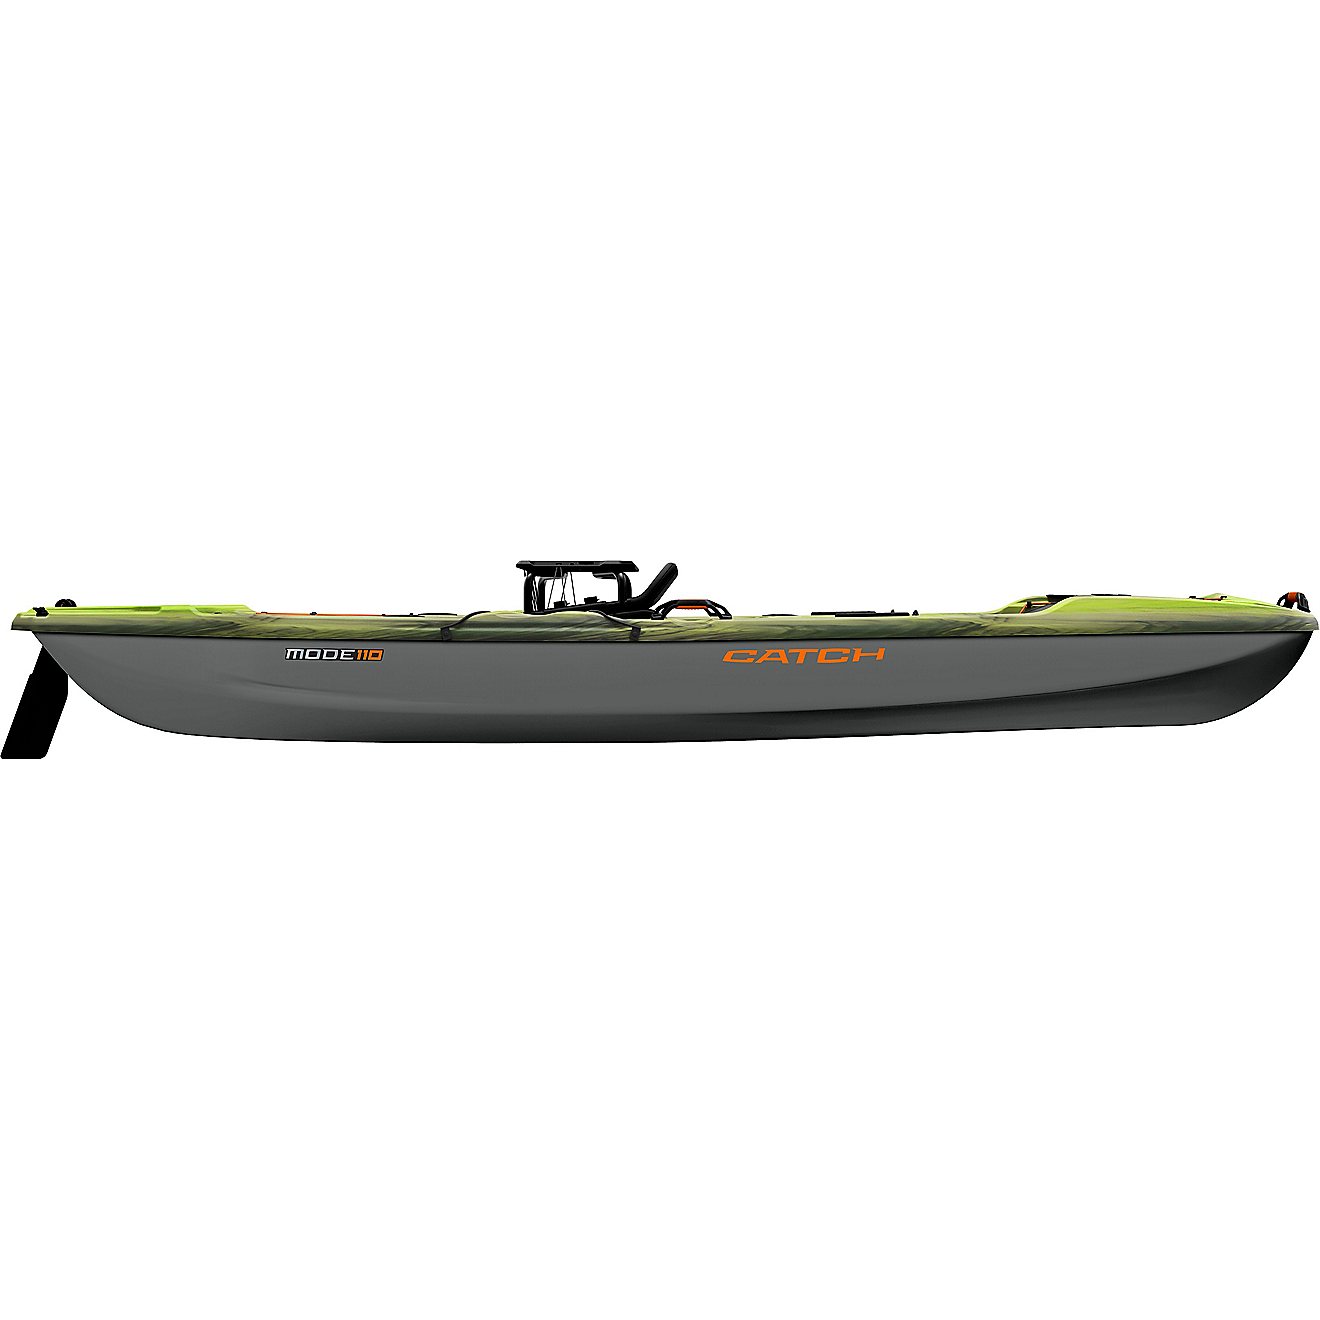 Pelican The Catch Mode 110 Sit-On-Top Fishing Kayak                                                                              - view number 4